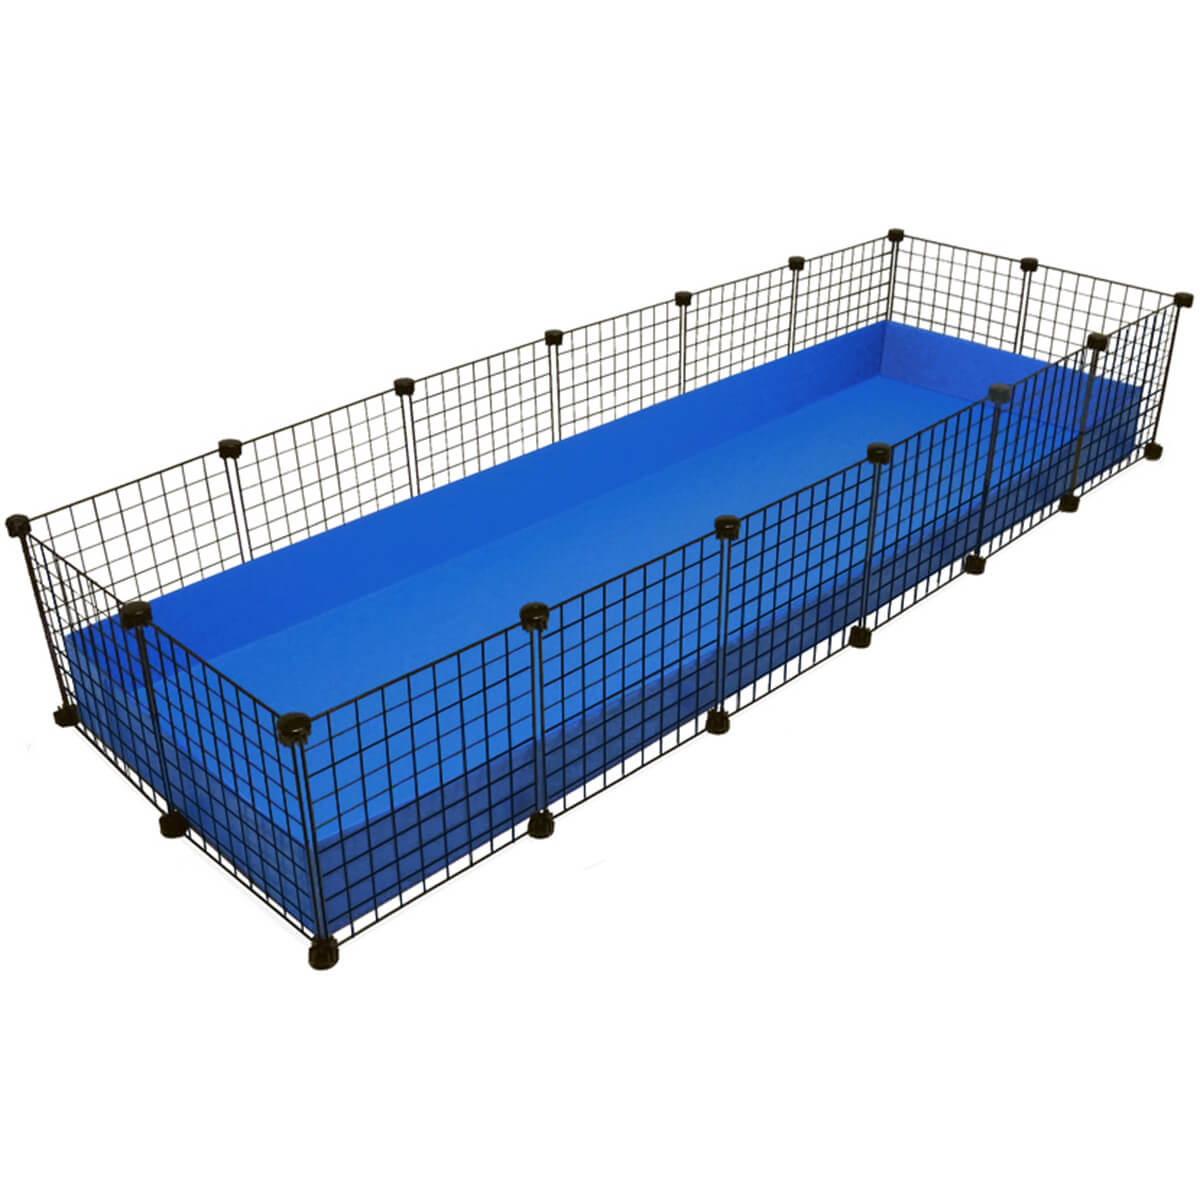 Jumbo (2x6 grids) C&C Guinea Pig Cage by Cagetopia